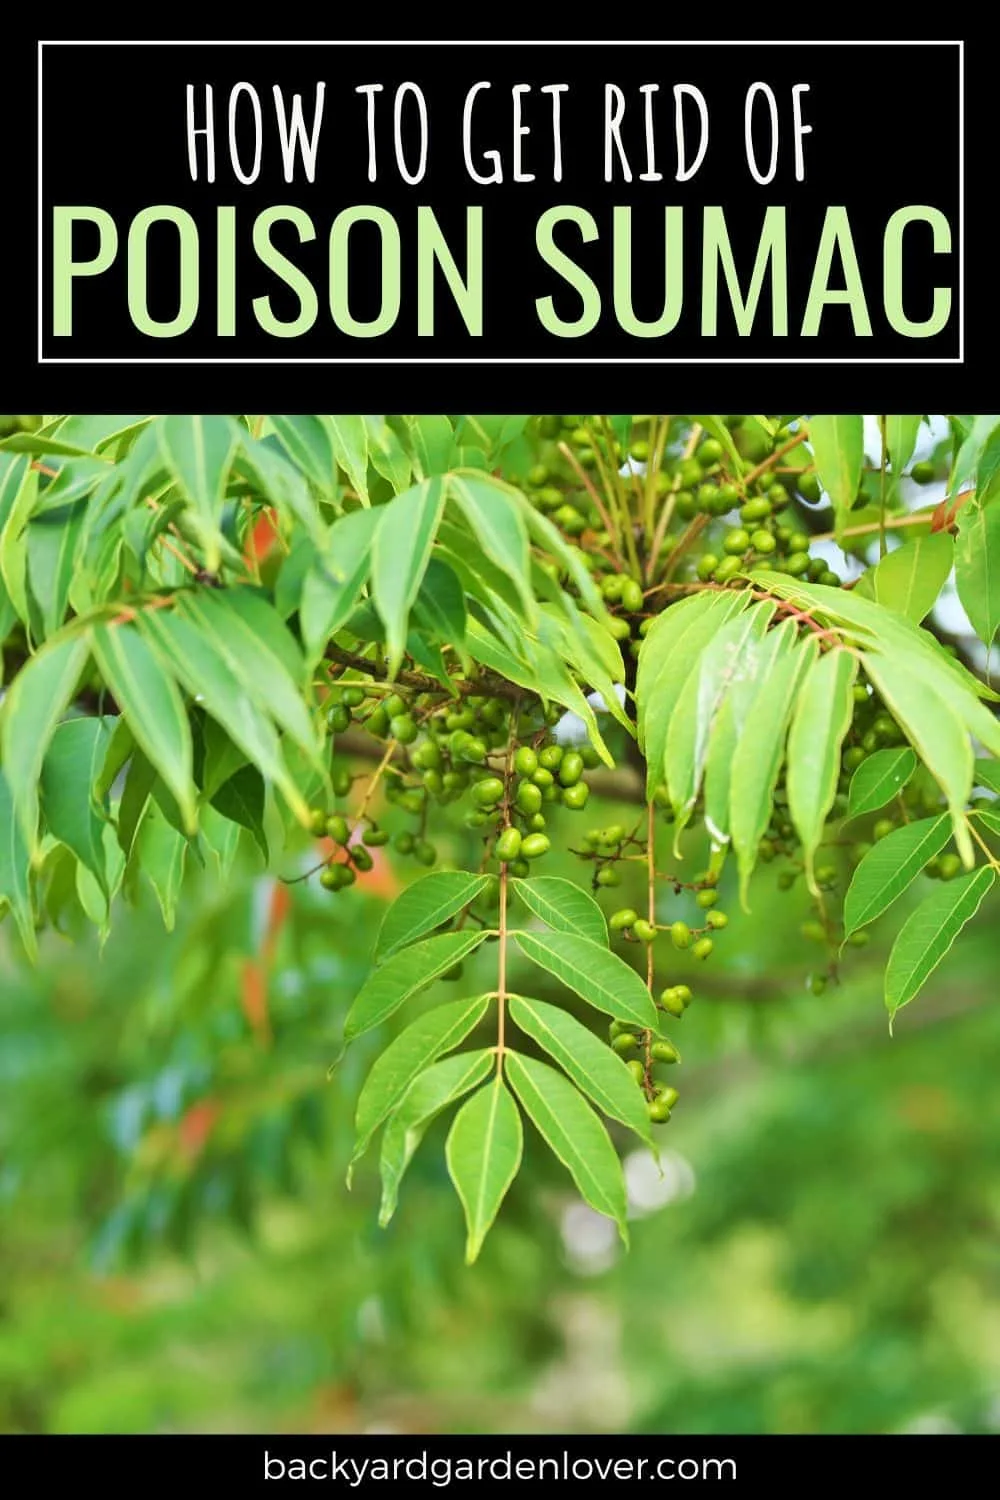 Poison sumac - how to get rid of it for good